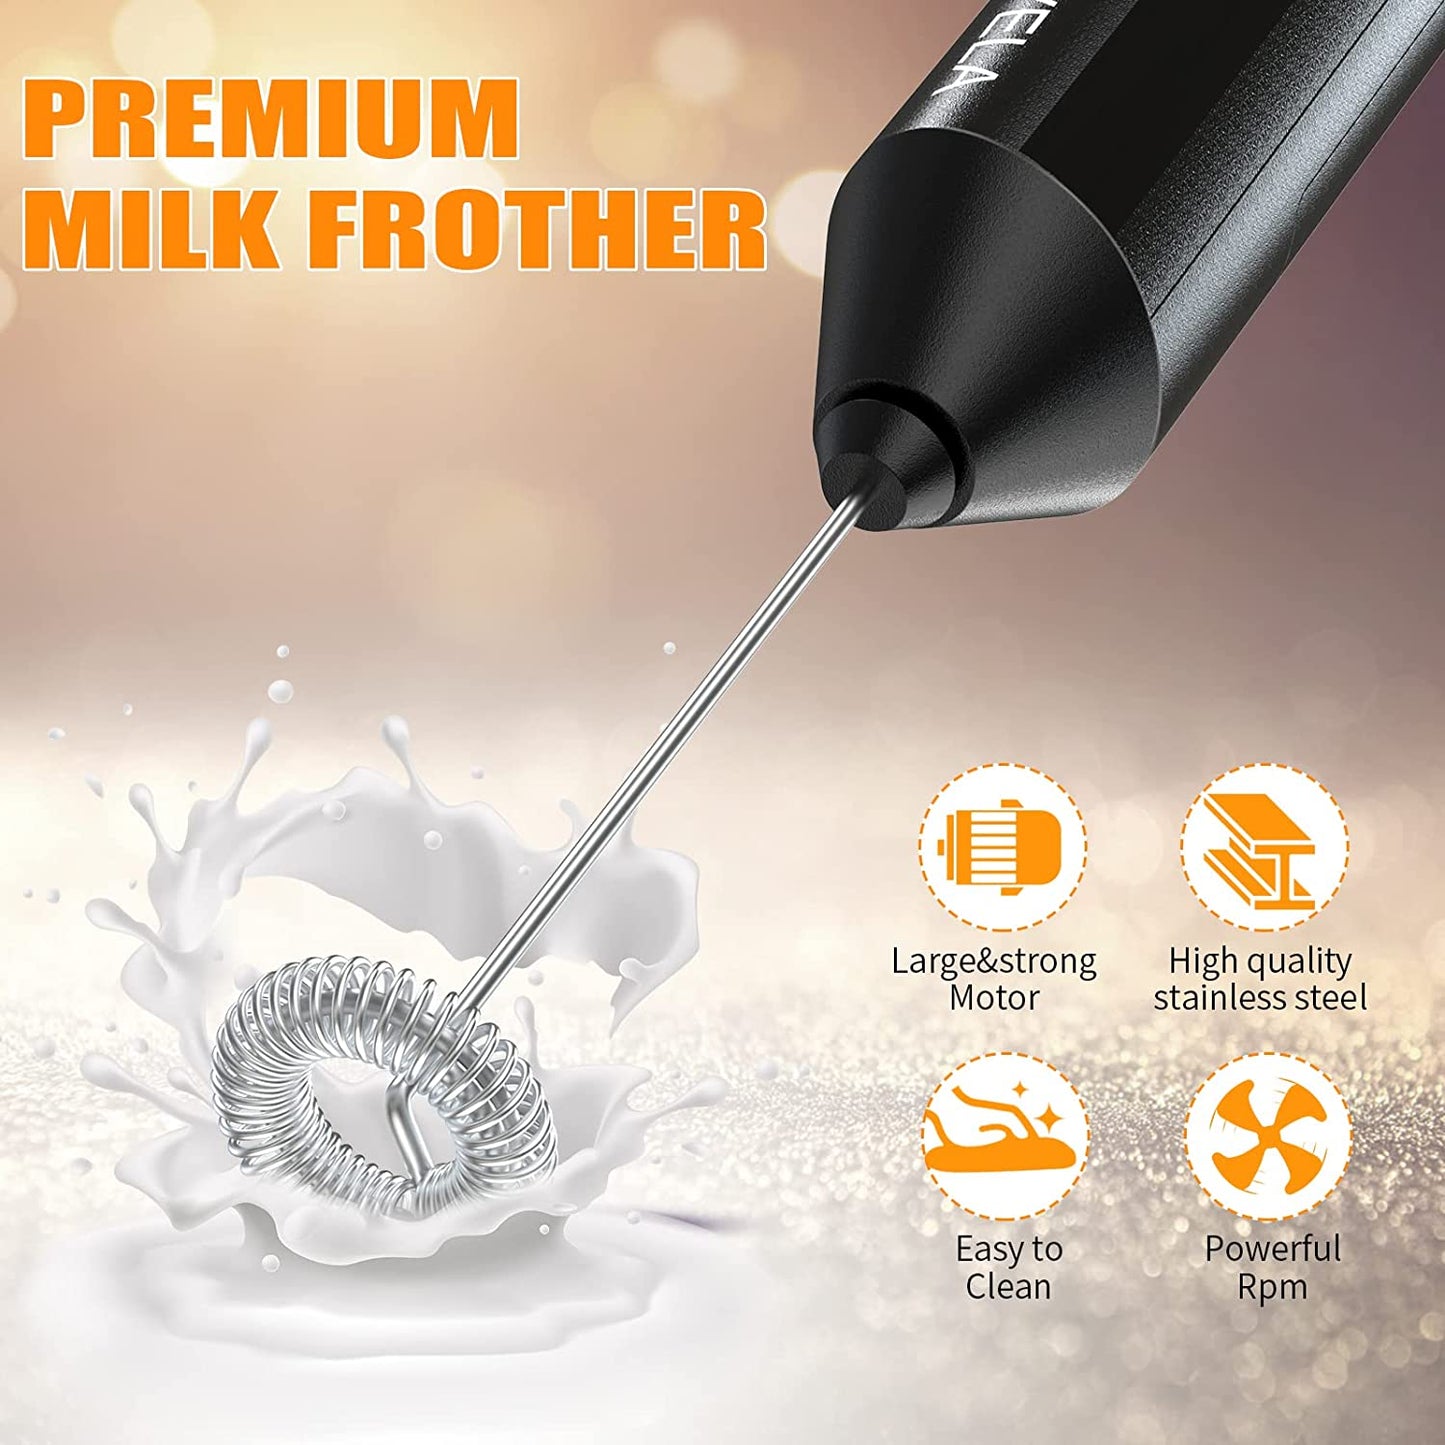 Milk Frother Handheld, Battery Operated Drink Mixer for Coffee, Handheld Electric Stirrer Foam Maker Whisk, Stainless Steel Milk Foamer for Coffee Latte, Cappuccino, Frappe, Matcha